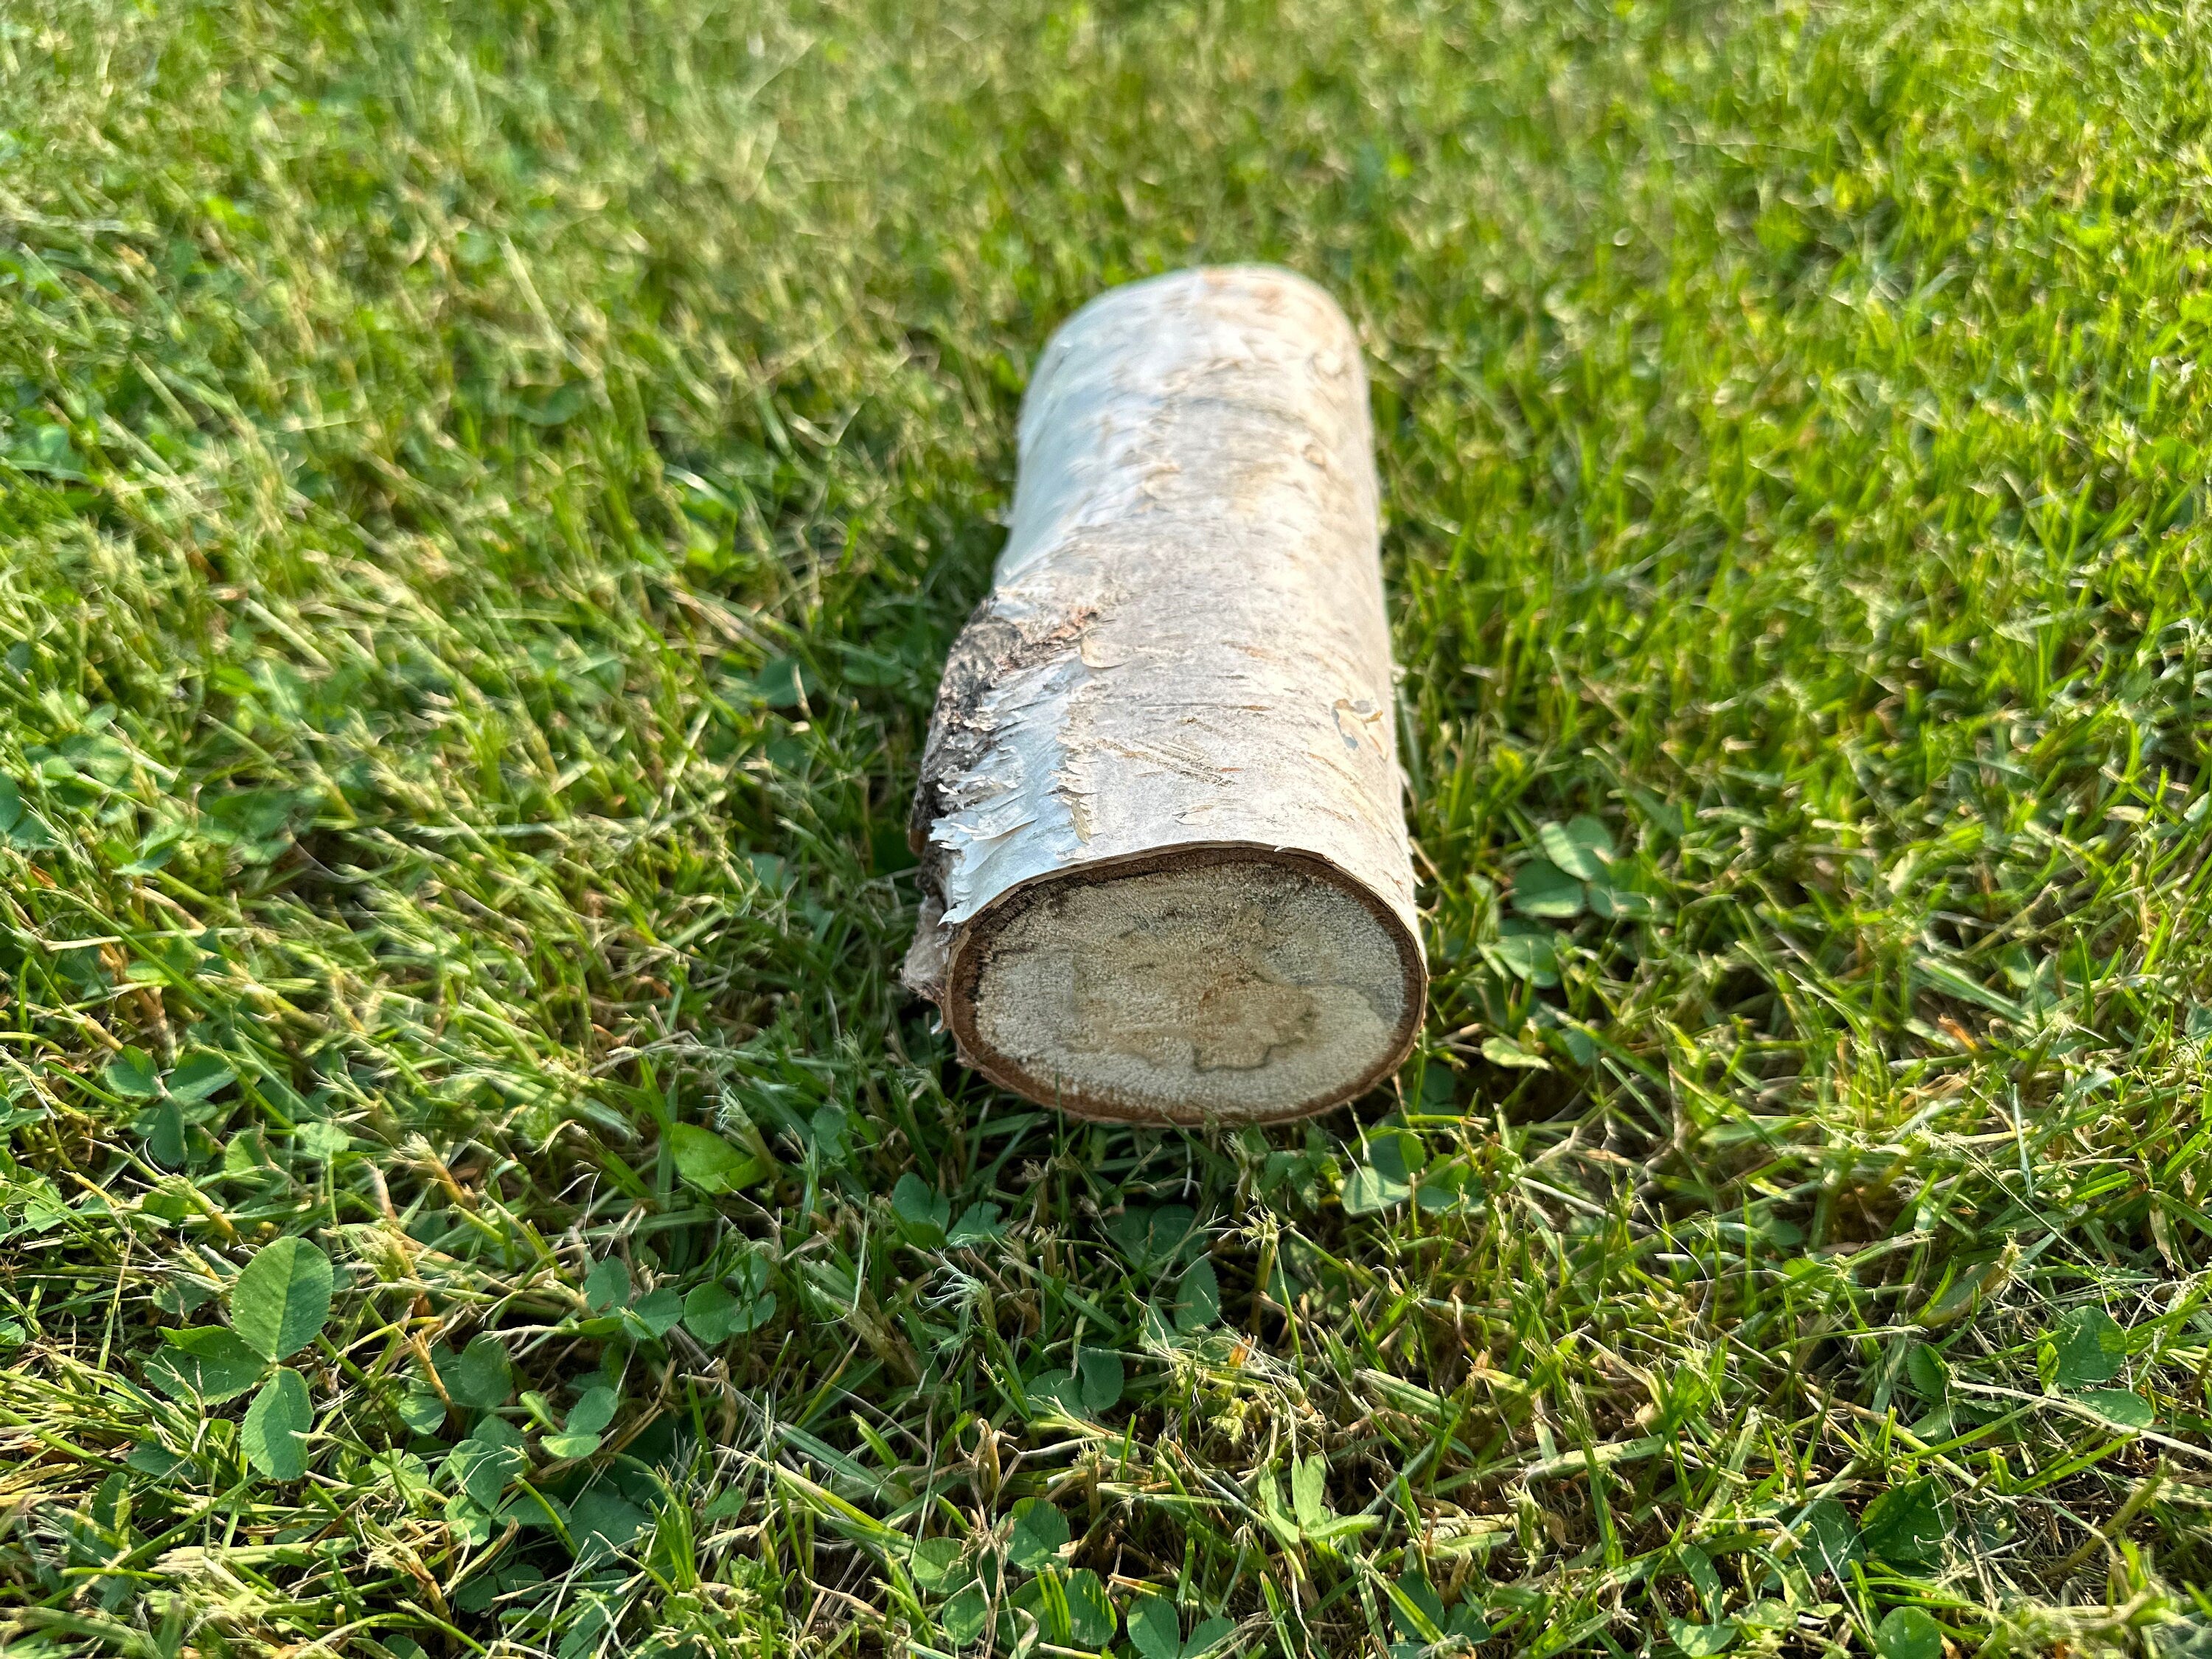 White Birch Log Seconds, Paper Birch, 6 Inches Long, Bundles Available